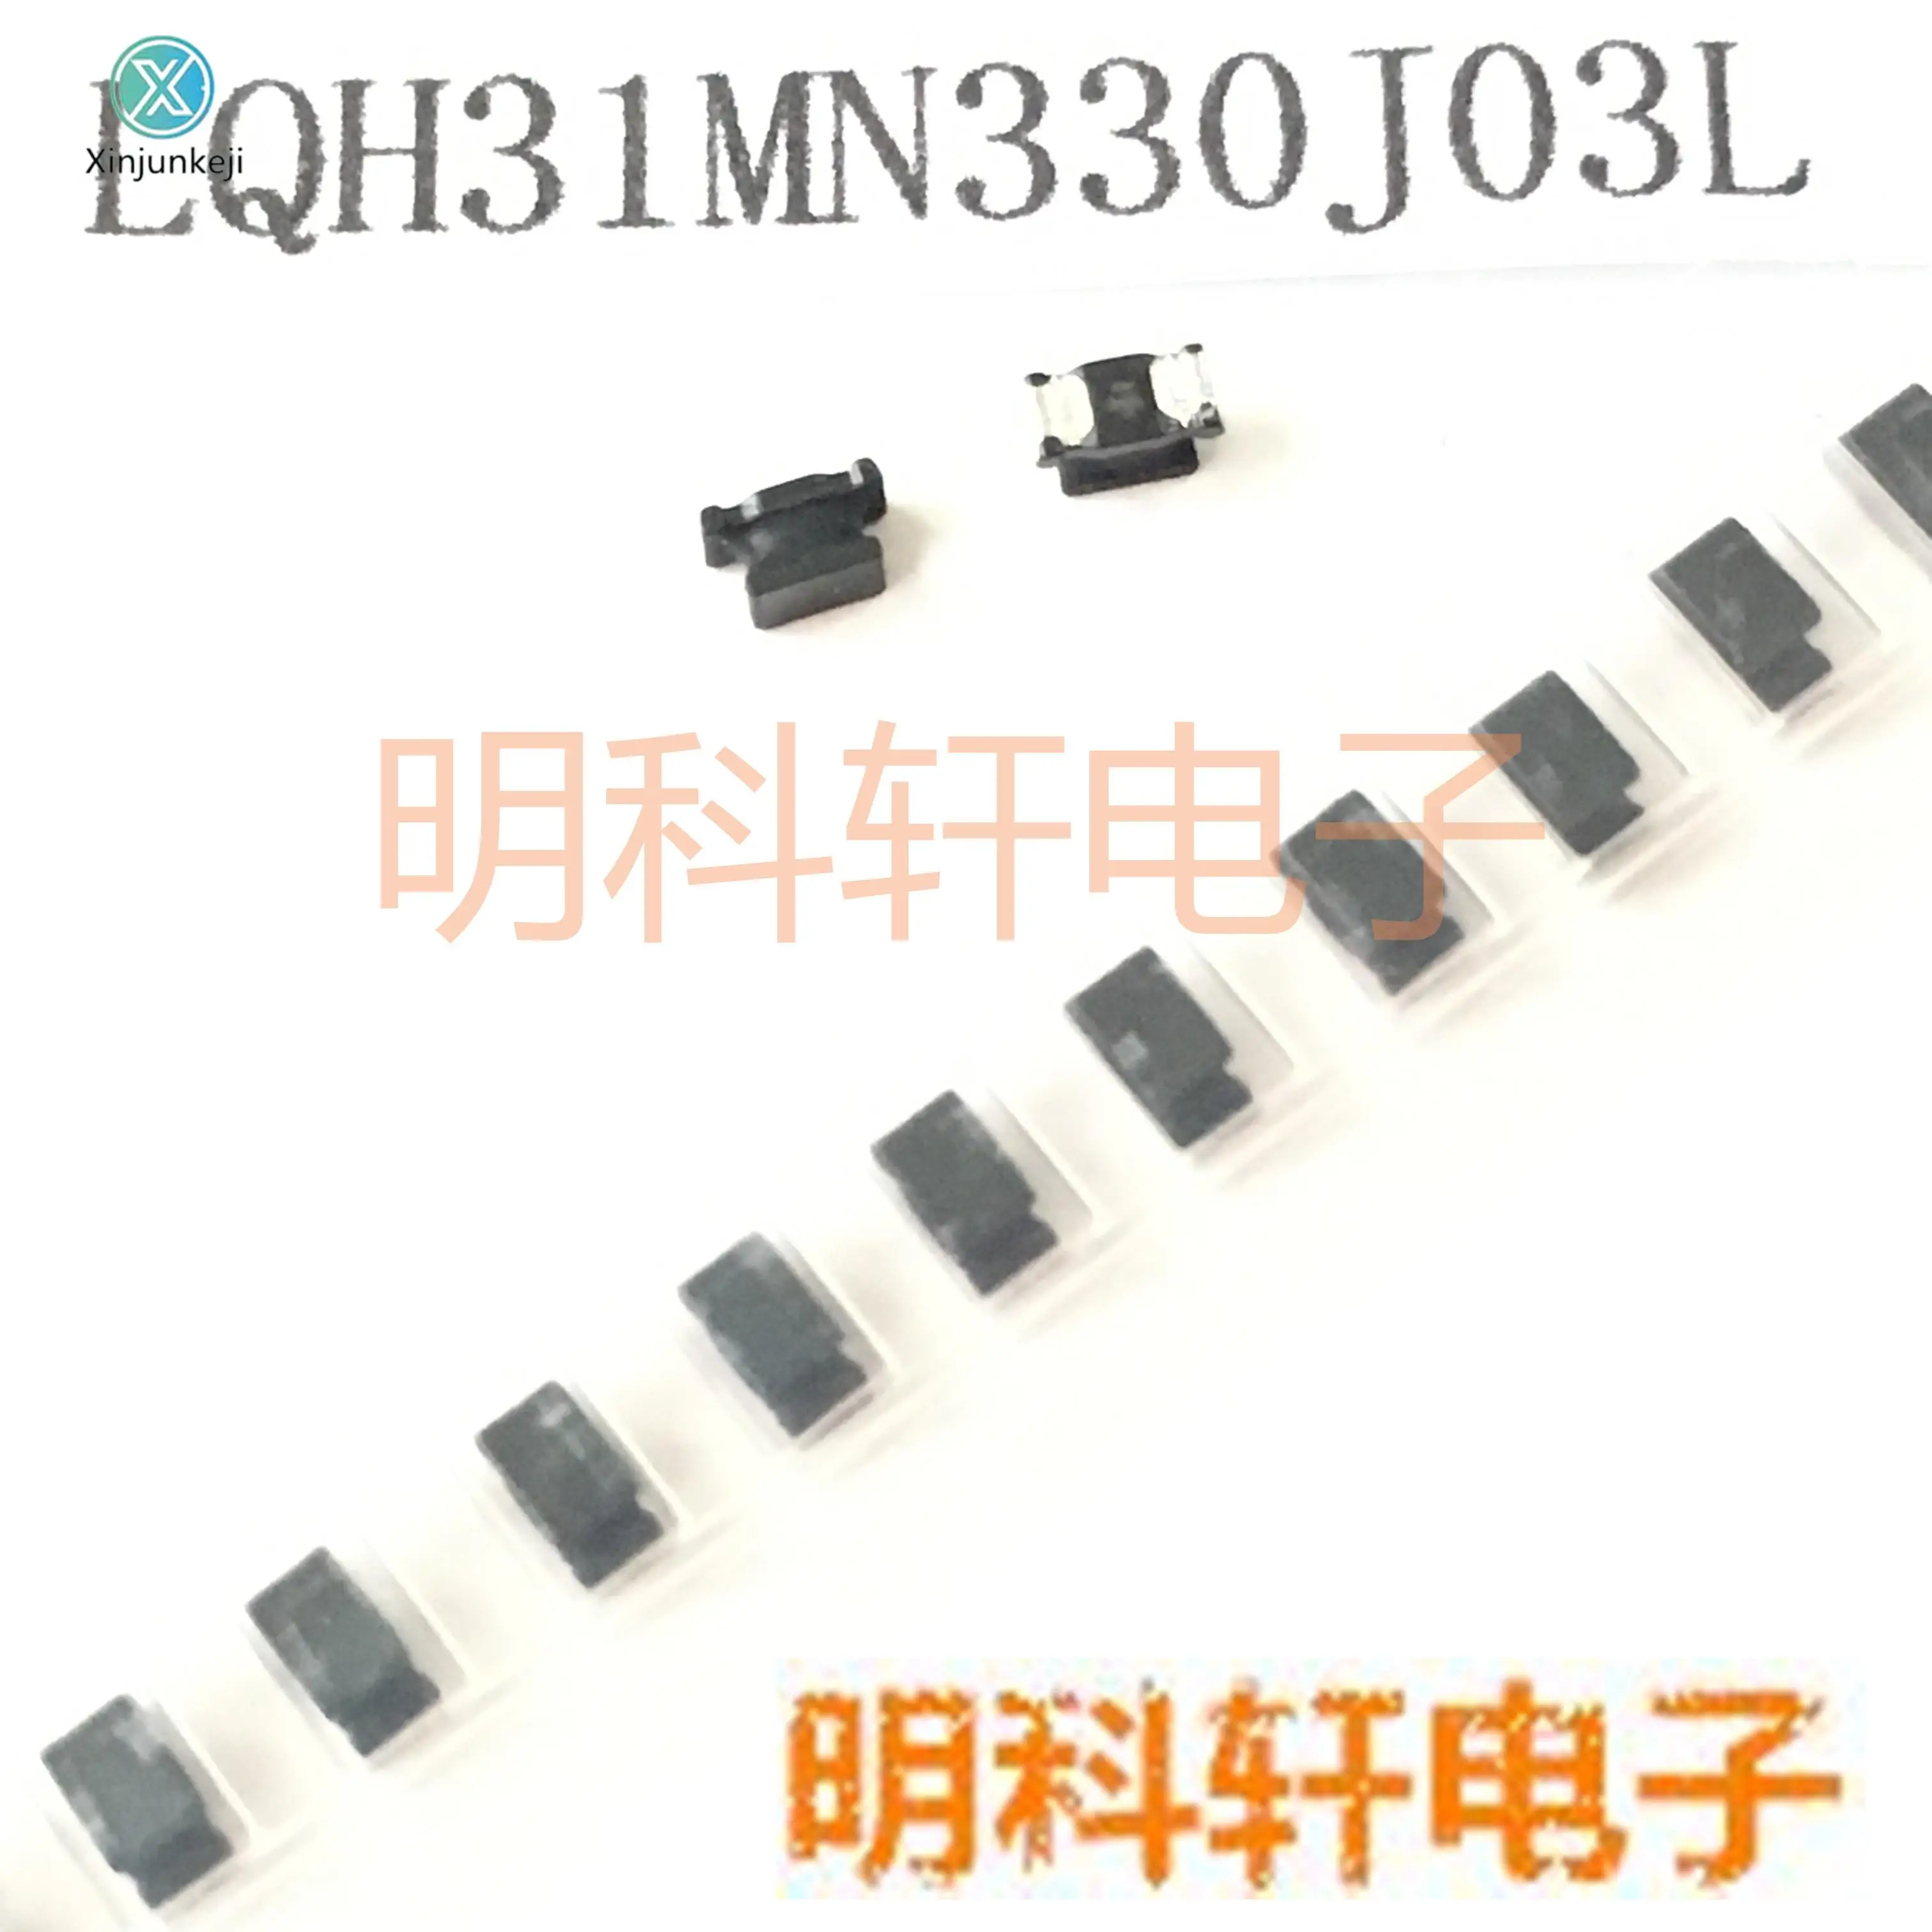 

20pcs orginal new LQH31MN330J03L SMD I-shaped wire wound inductor 3216 1206 33UH 5% 80mA